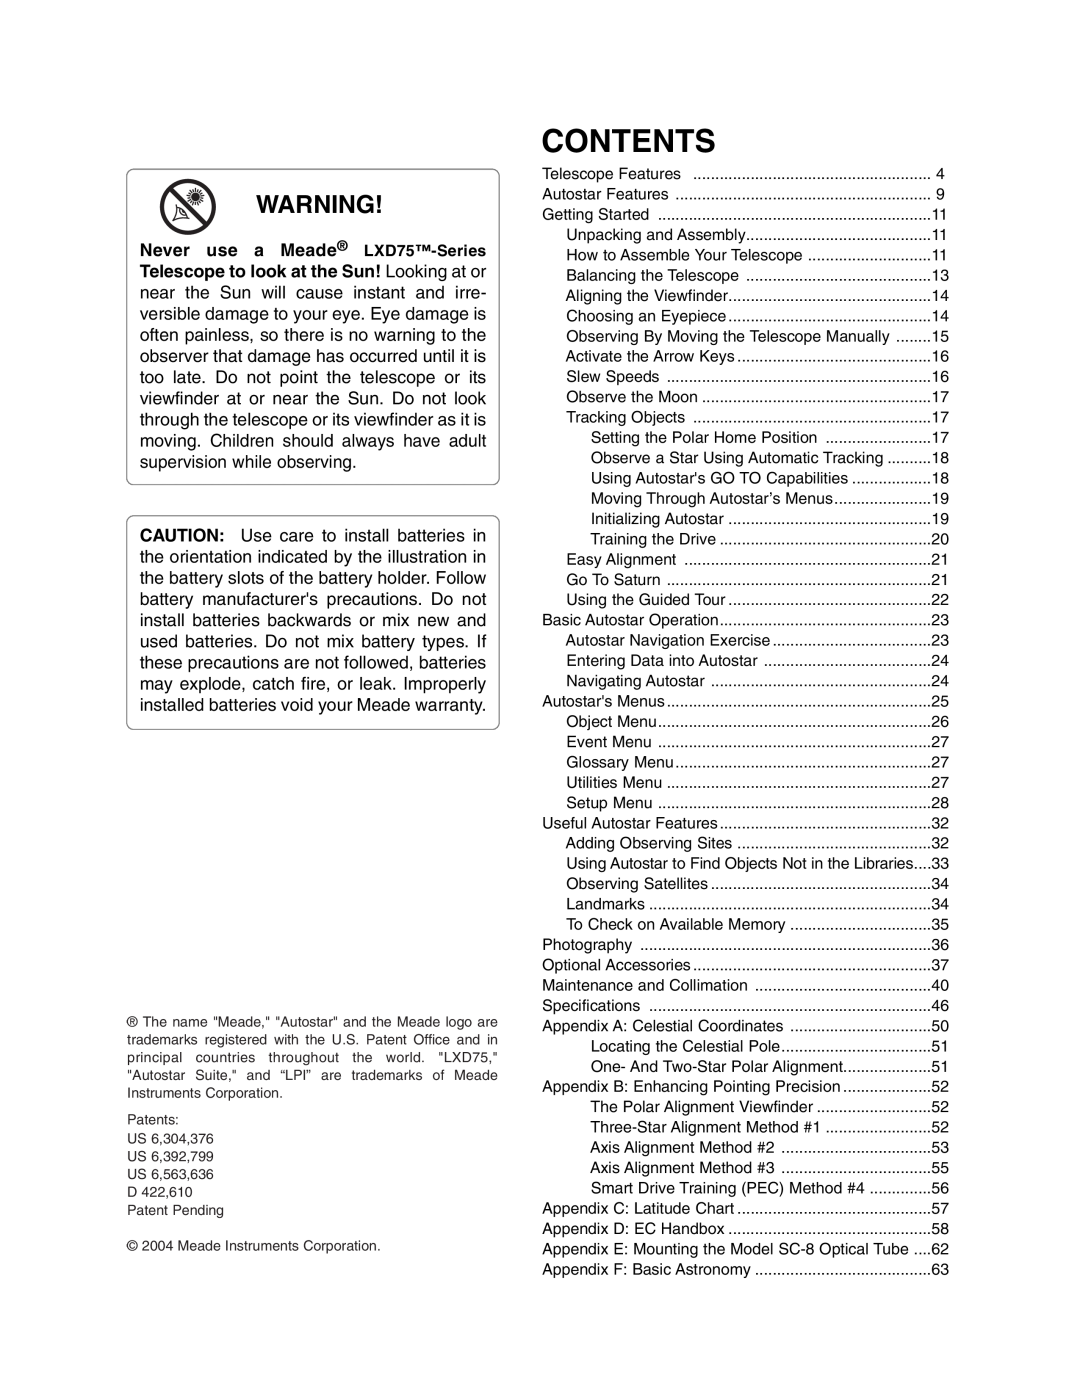 Meade LXD75 instruction manual Contents 